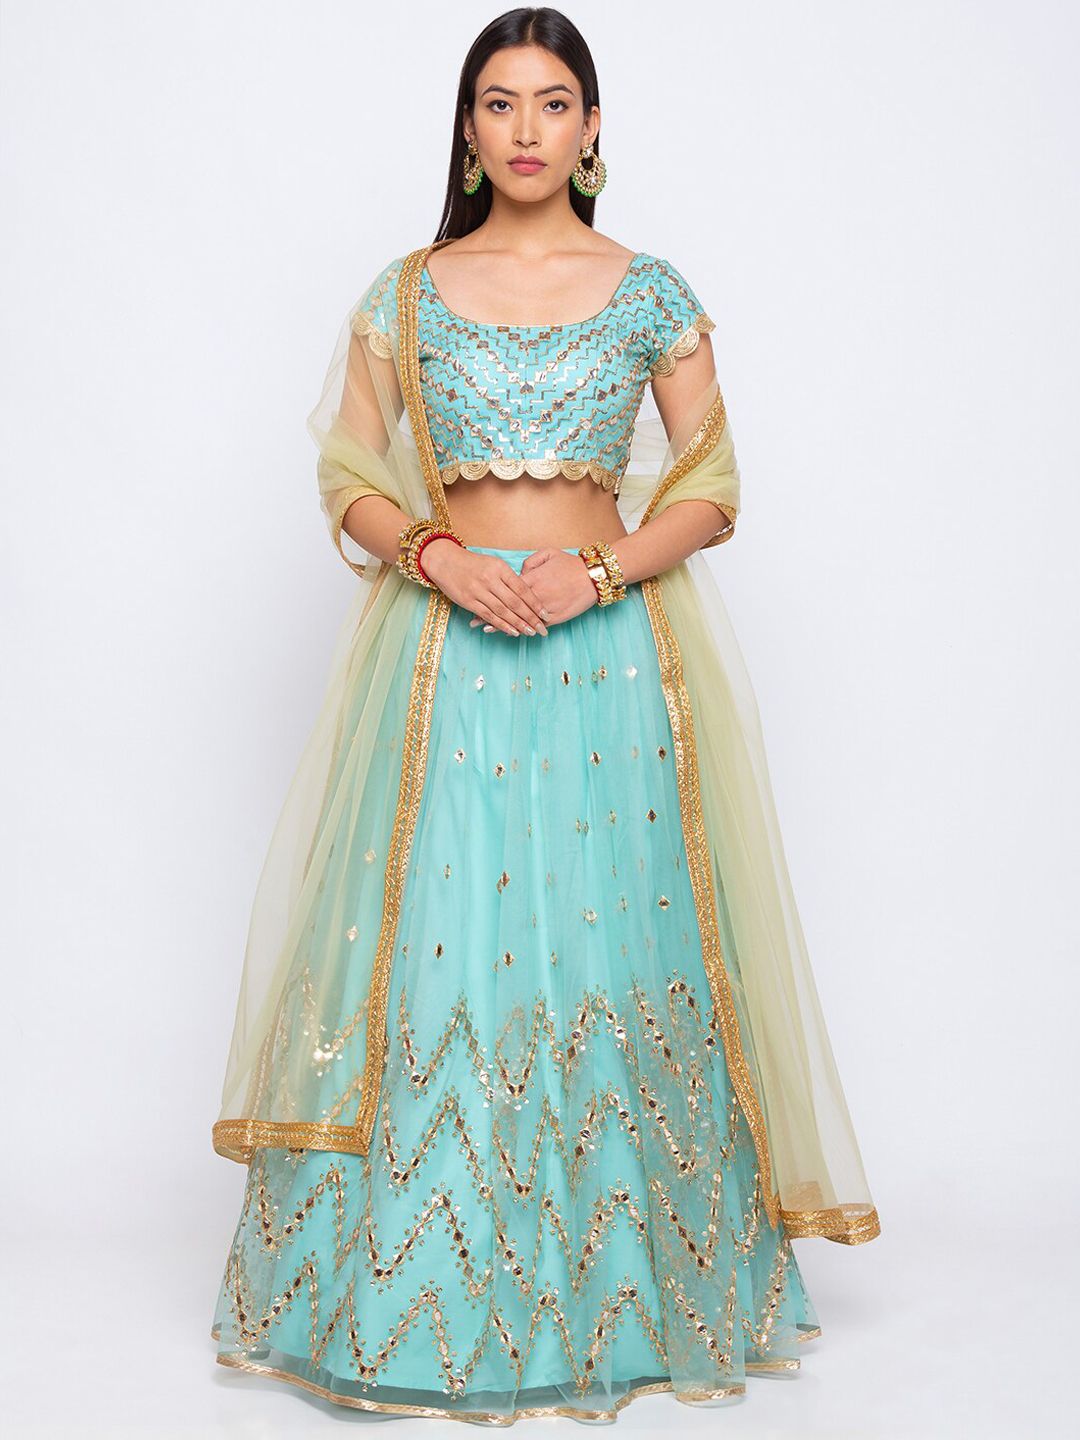 6Y COLLECTIVE Turquoise Blue & Gold-Toned Semi-stitched Lehenga-unstitched blouse &dupatta Price in India